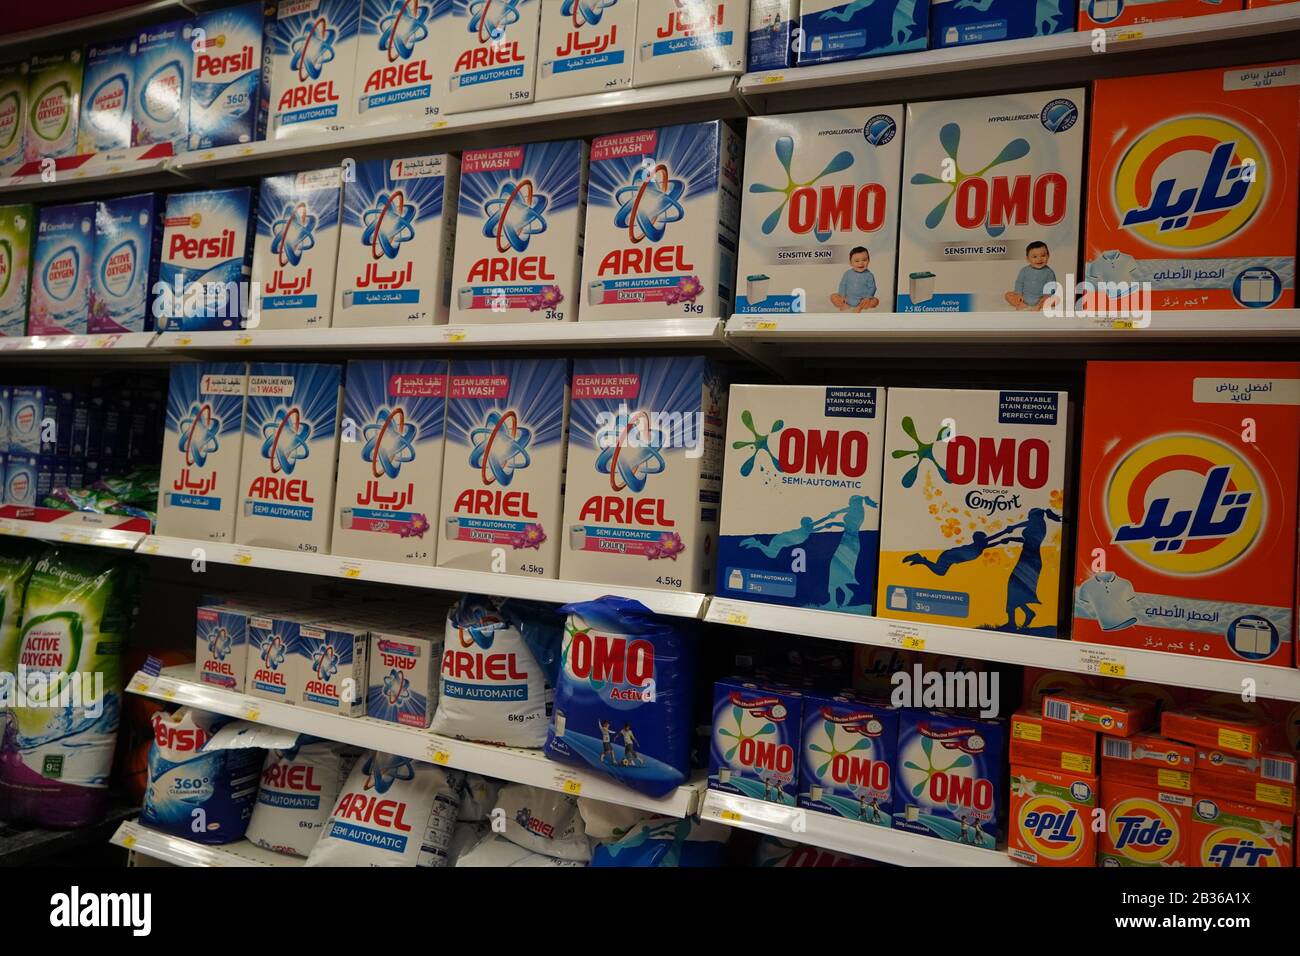 Supermarket display with different brands of washing powder in boxes. Wholesale. Tide, Ariel, Omo laundry detergent boxes lined up for sale in a store Stock Photo